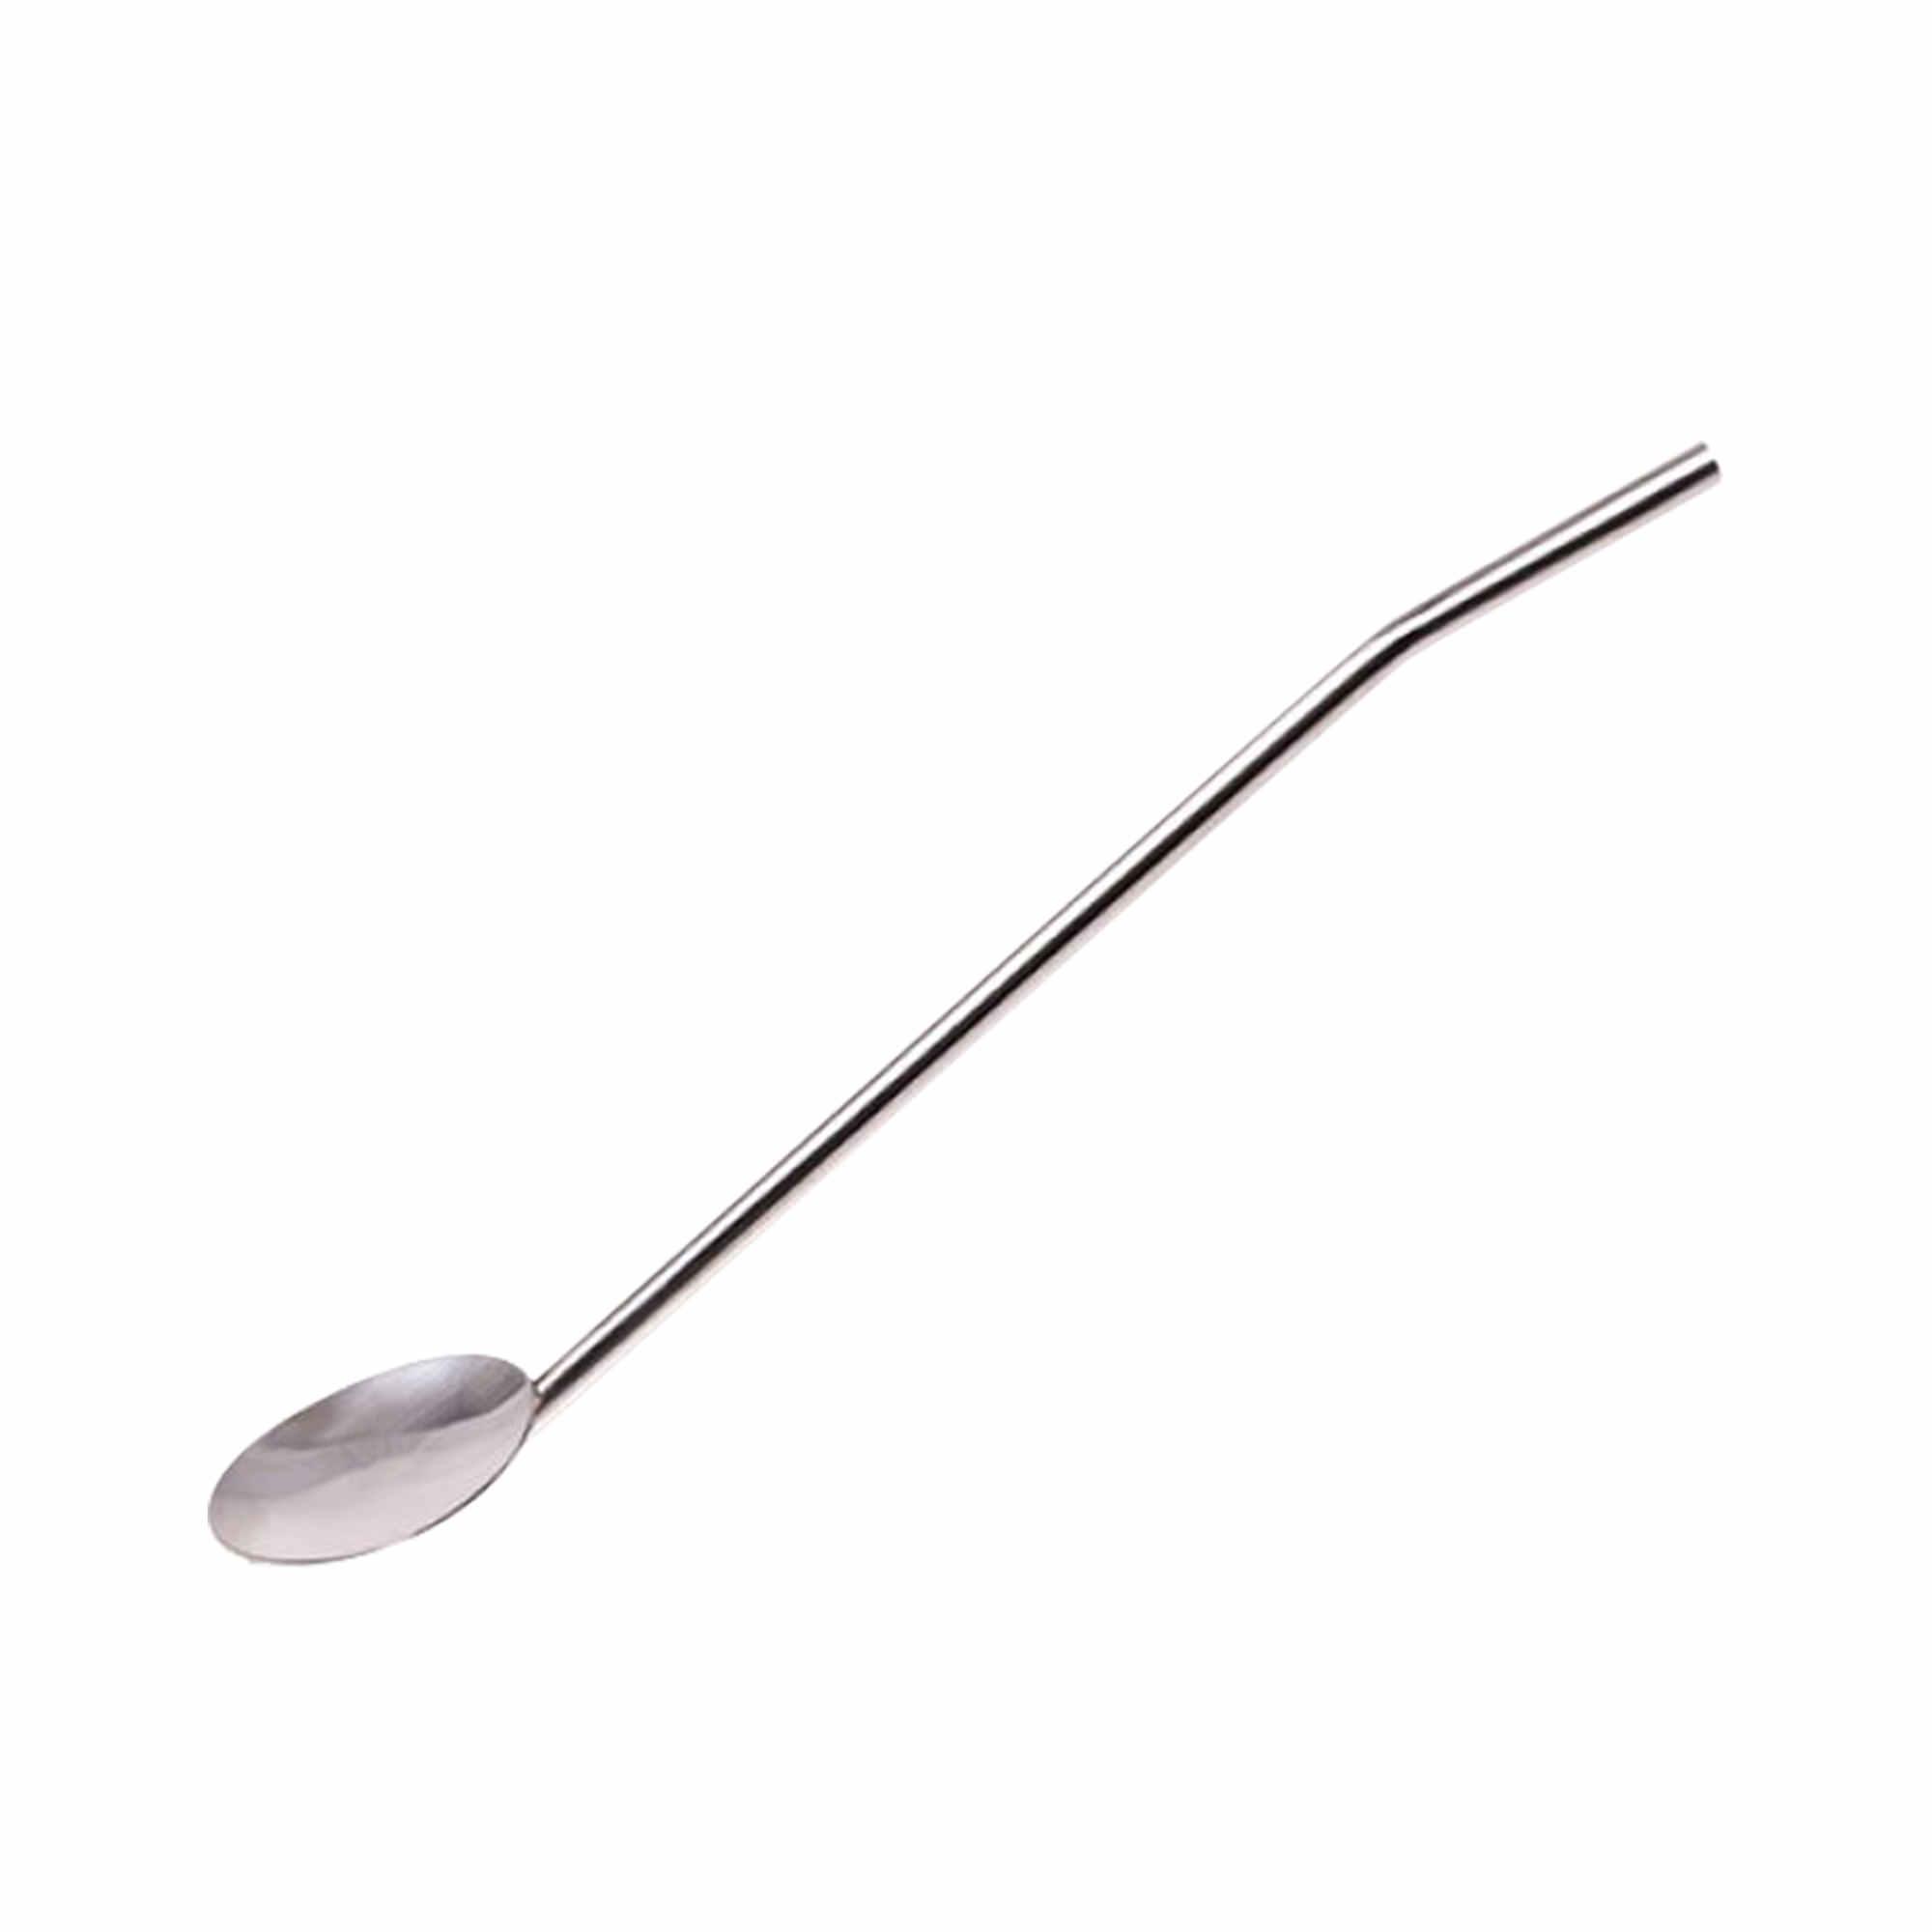 Casabarista Stainless Steel Spoon and Straw Image 1